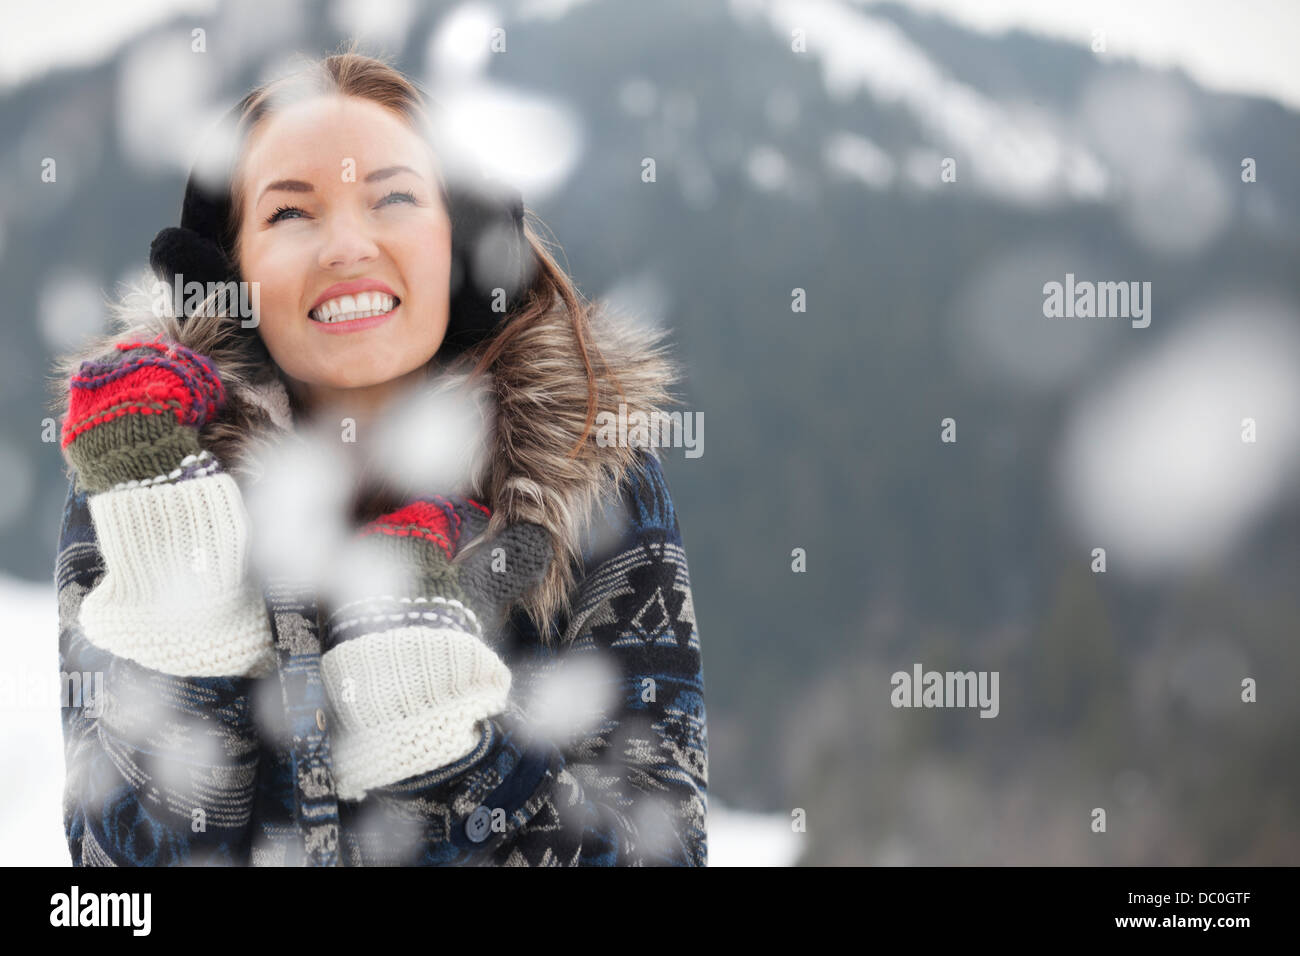 Happy woman wearing ear muffs and gloves in snow Stock Photo